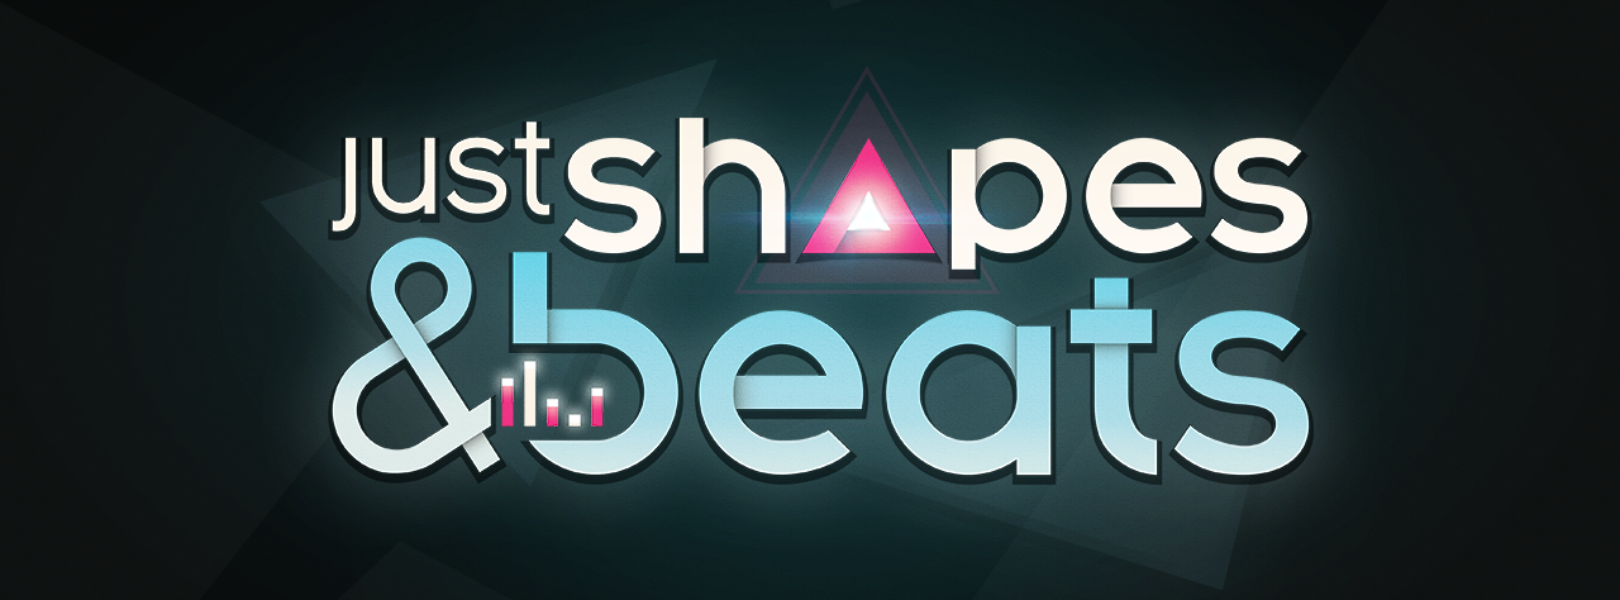 Just Shapes and Beats Gets “Shovelier” With Mixtape #2 Free DLC -  Marooners' Rock